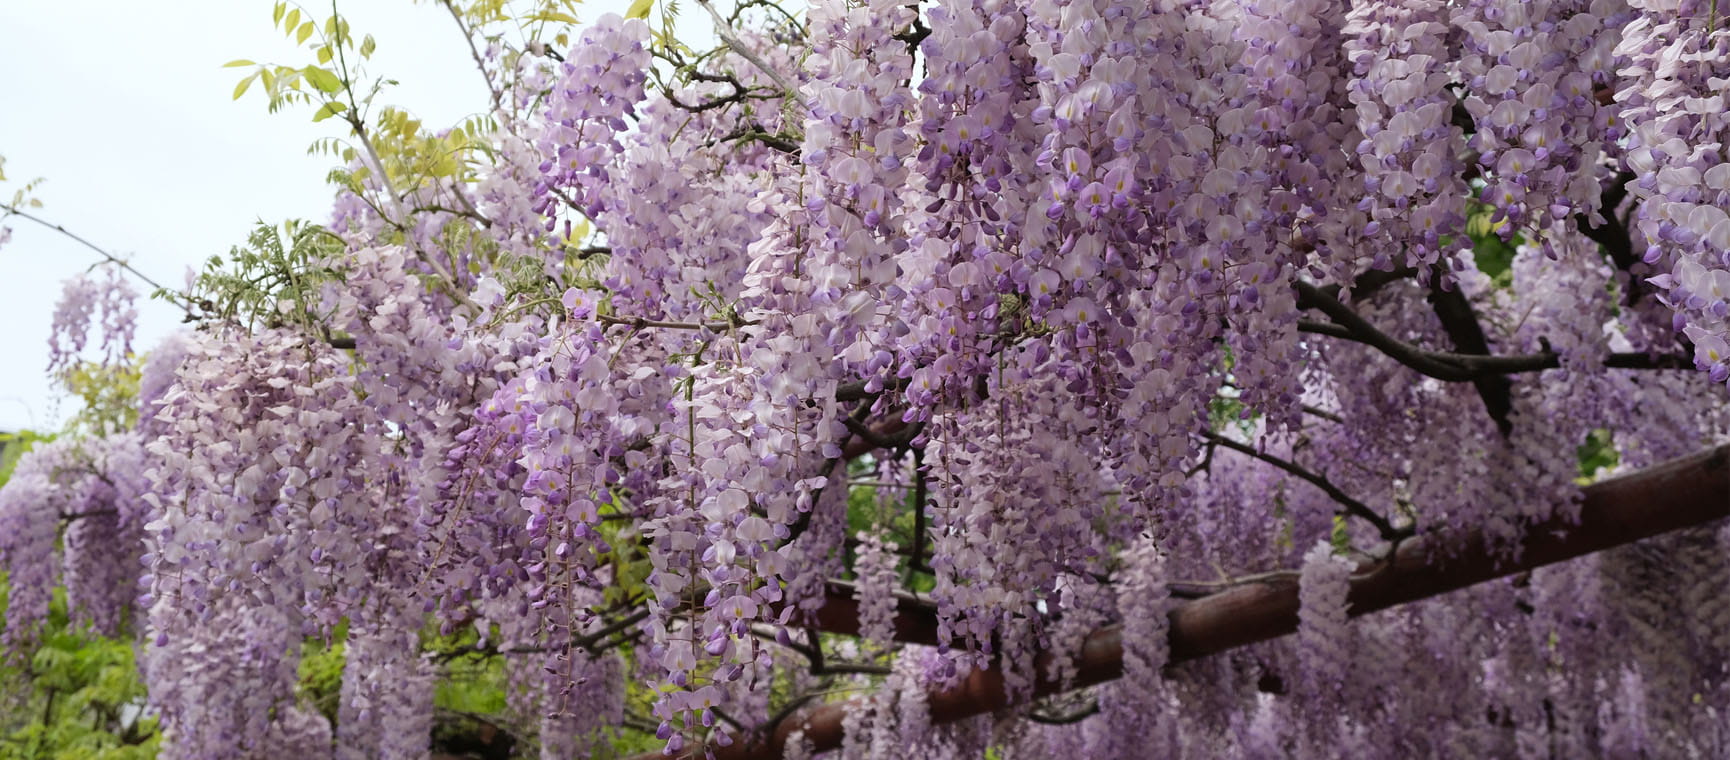 Wisteria growing over a frame